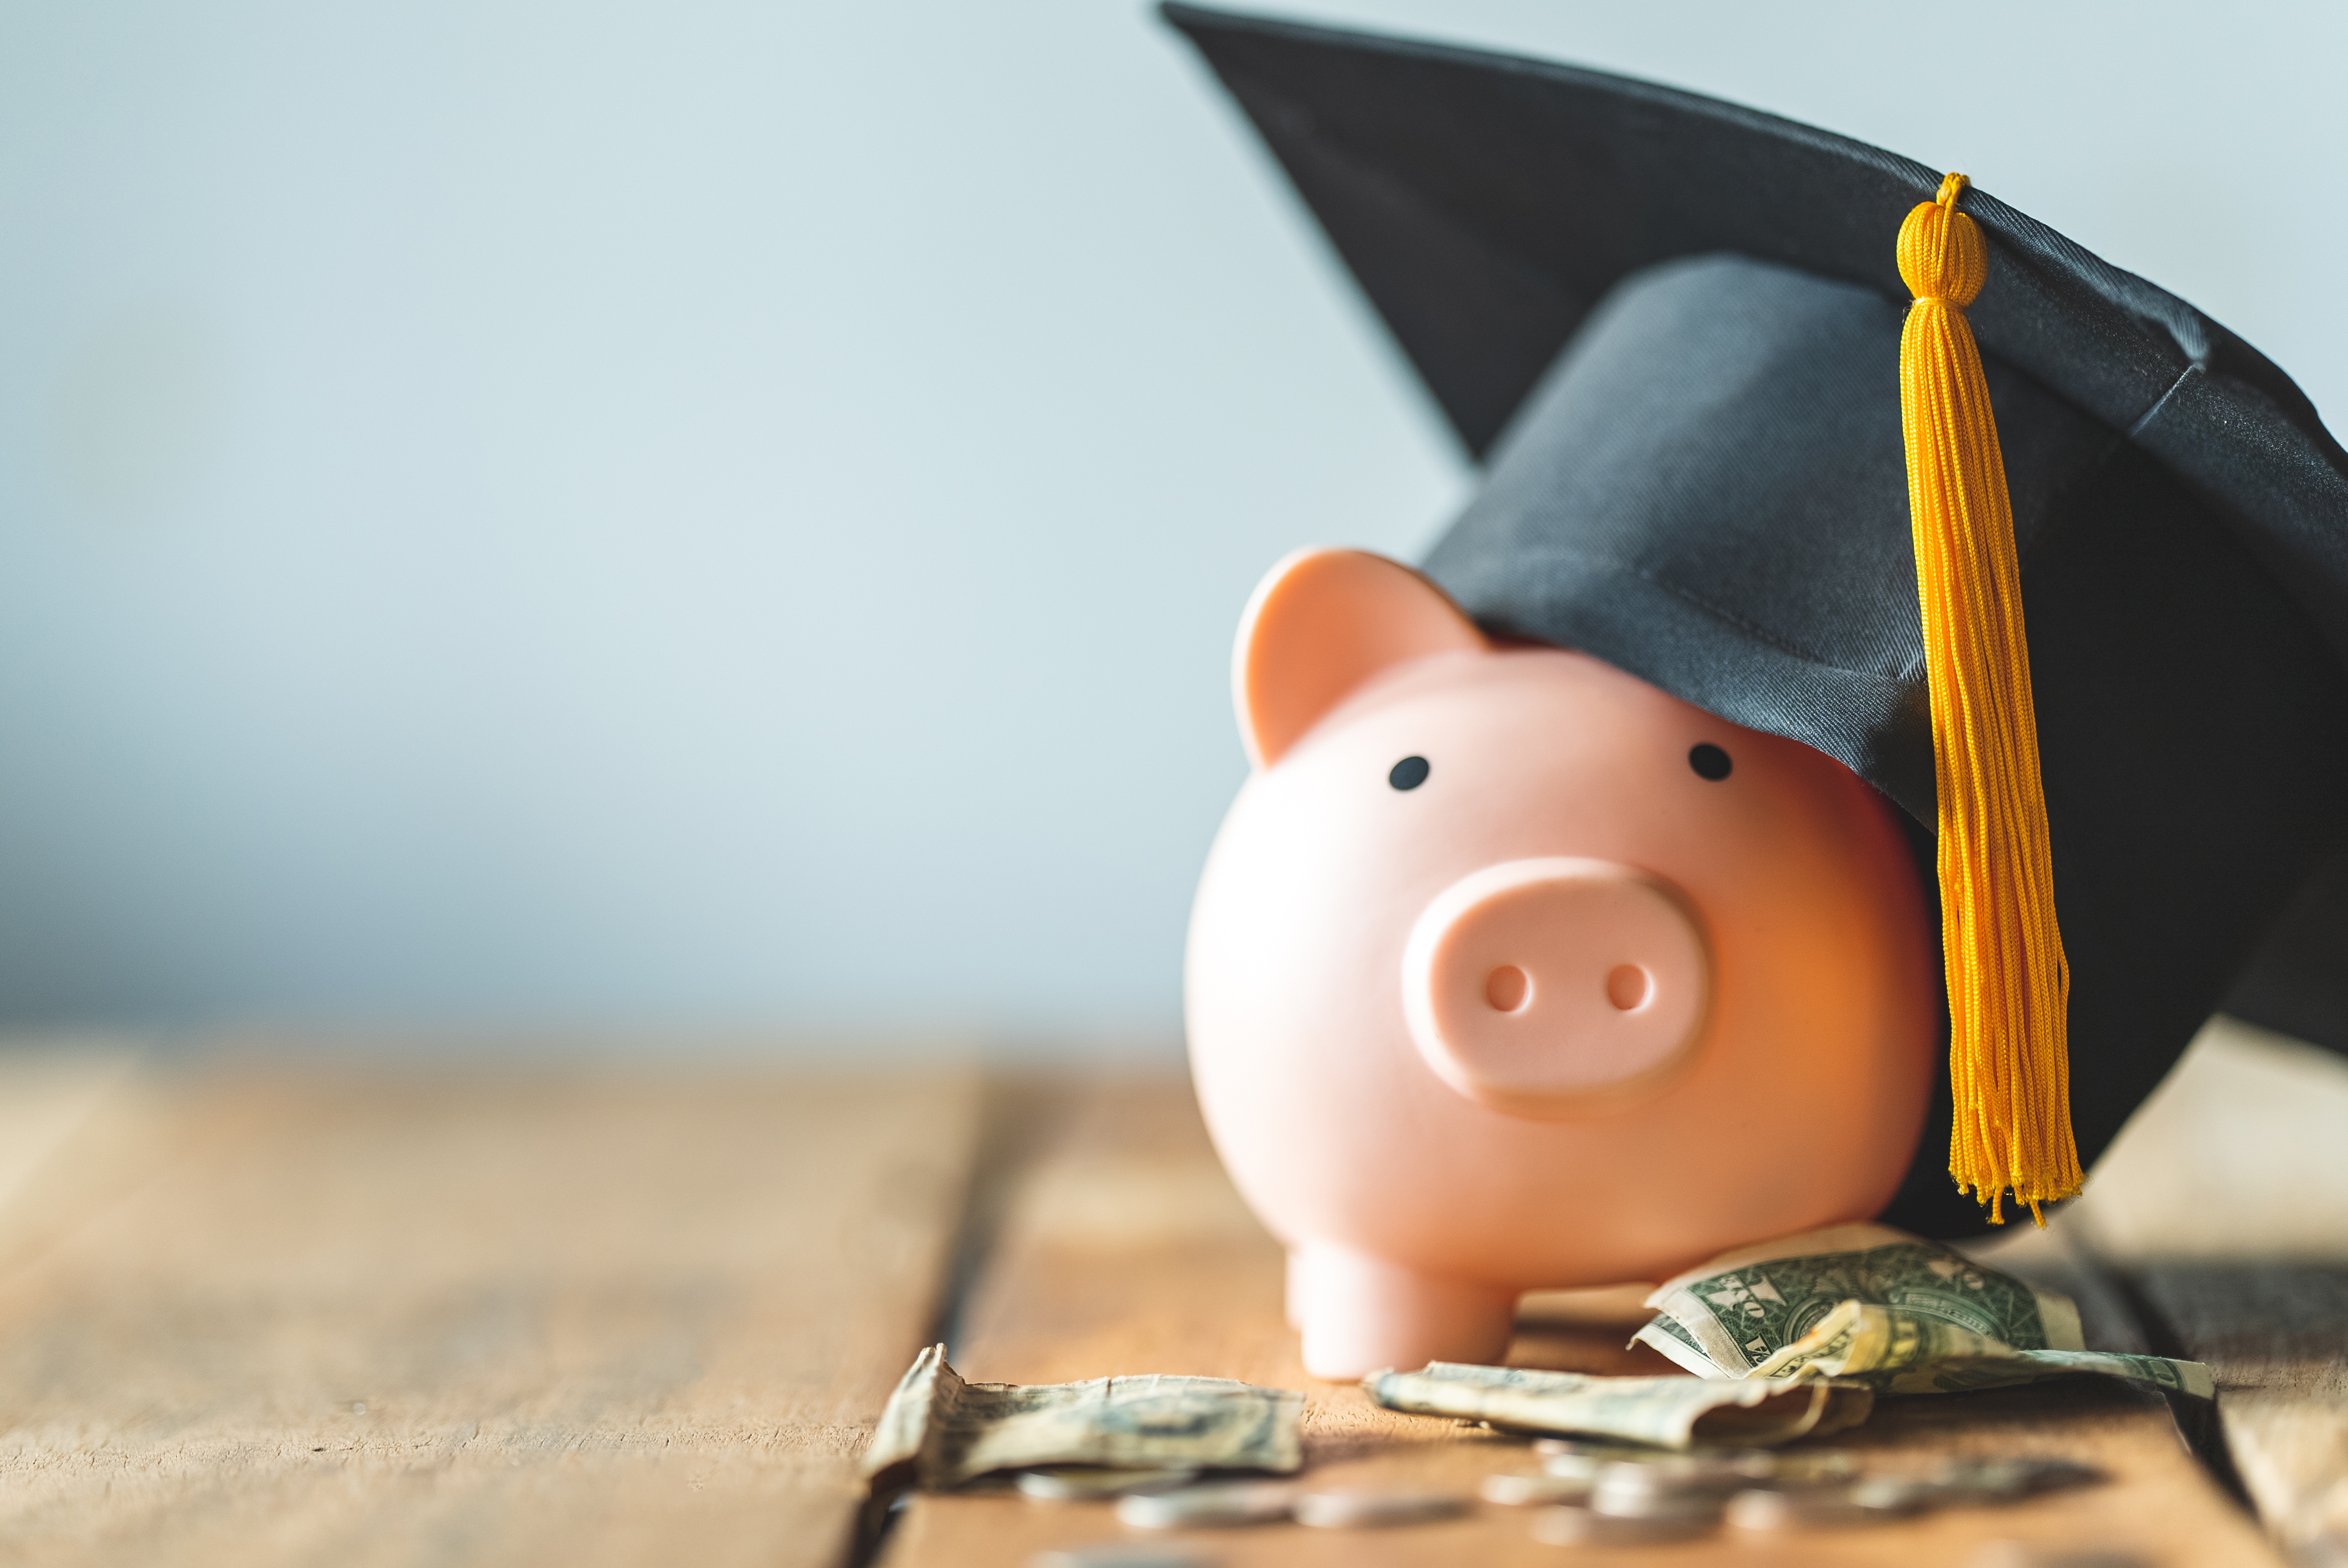 MONEY HACKS: What’s Happening with My Student Loans?